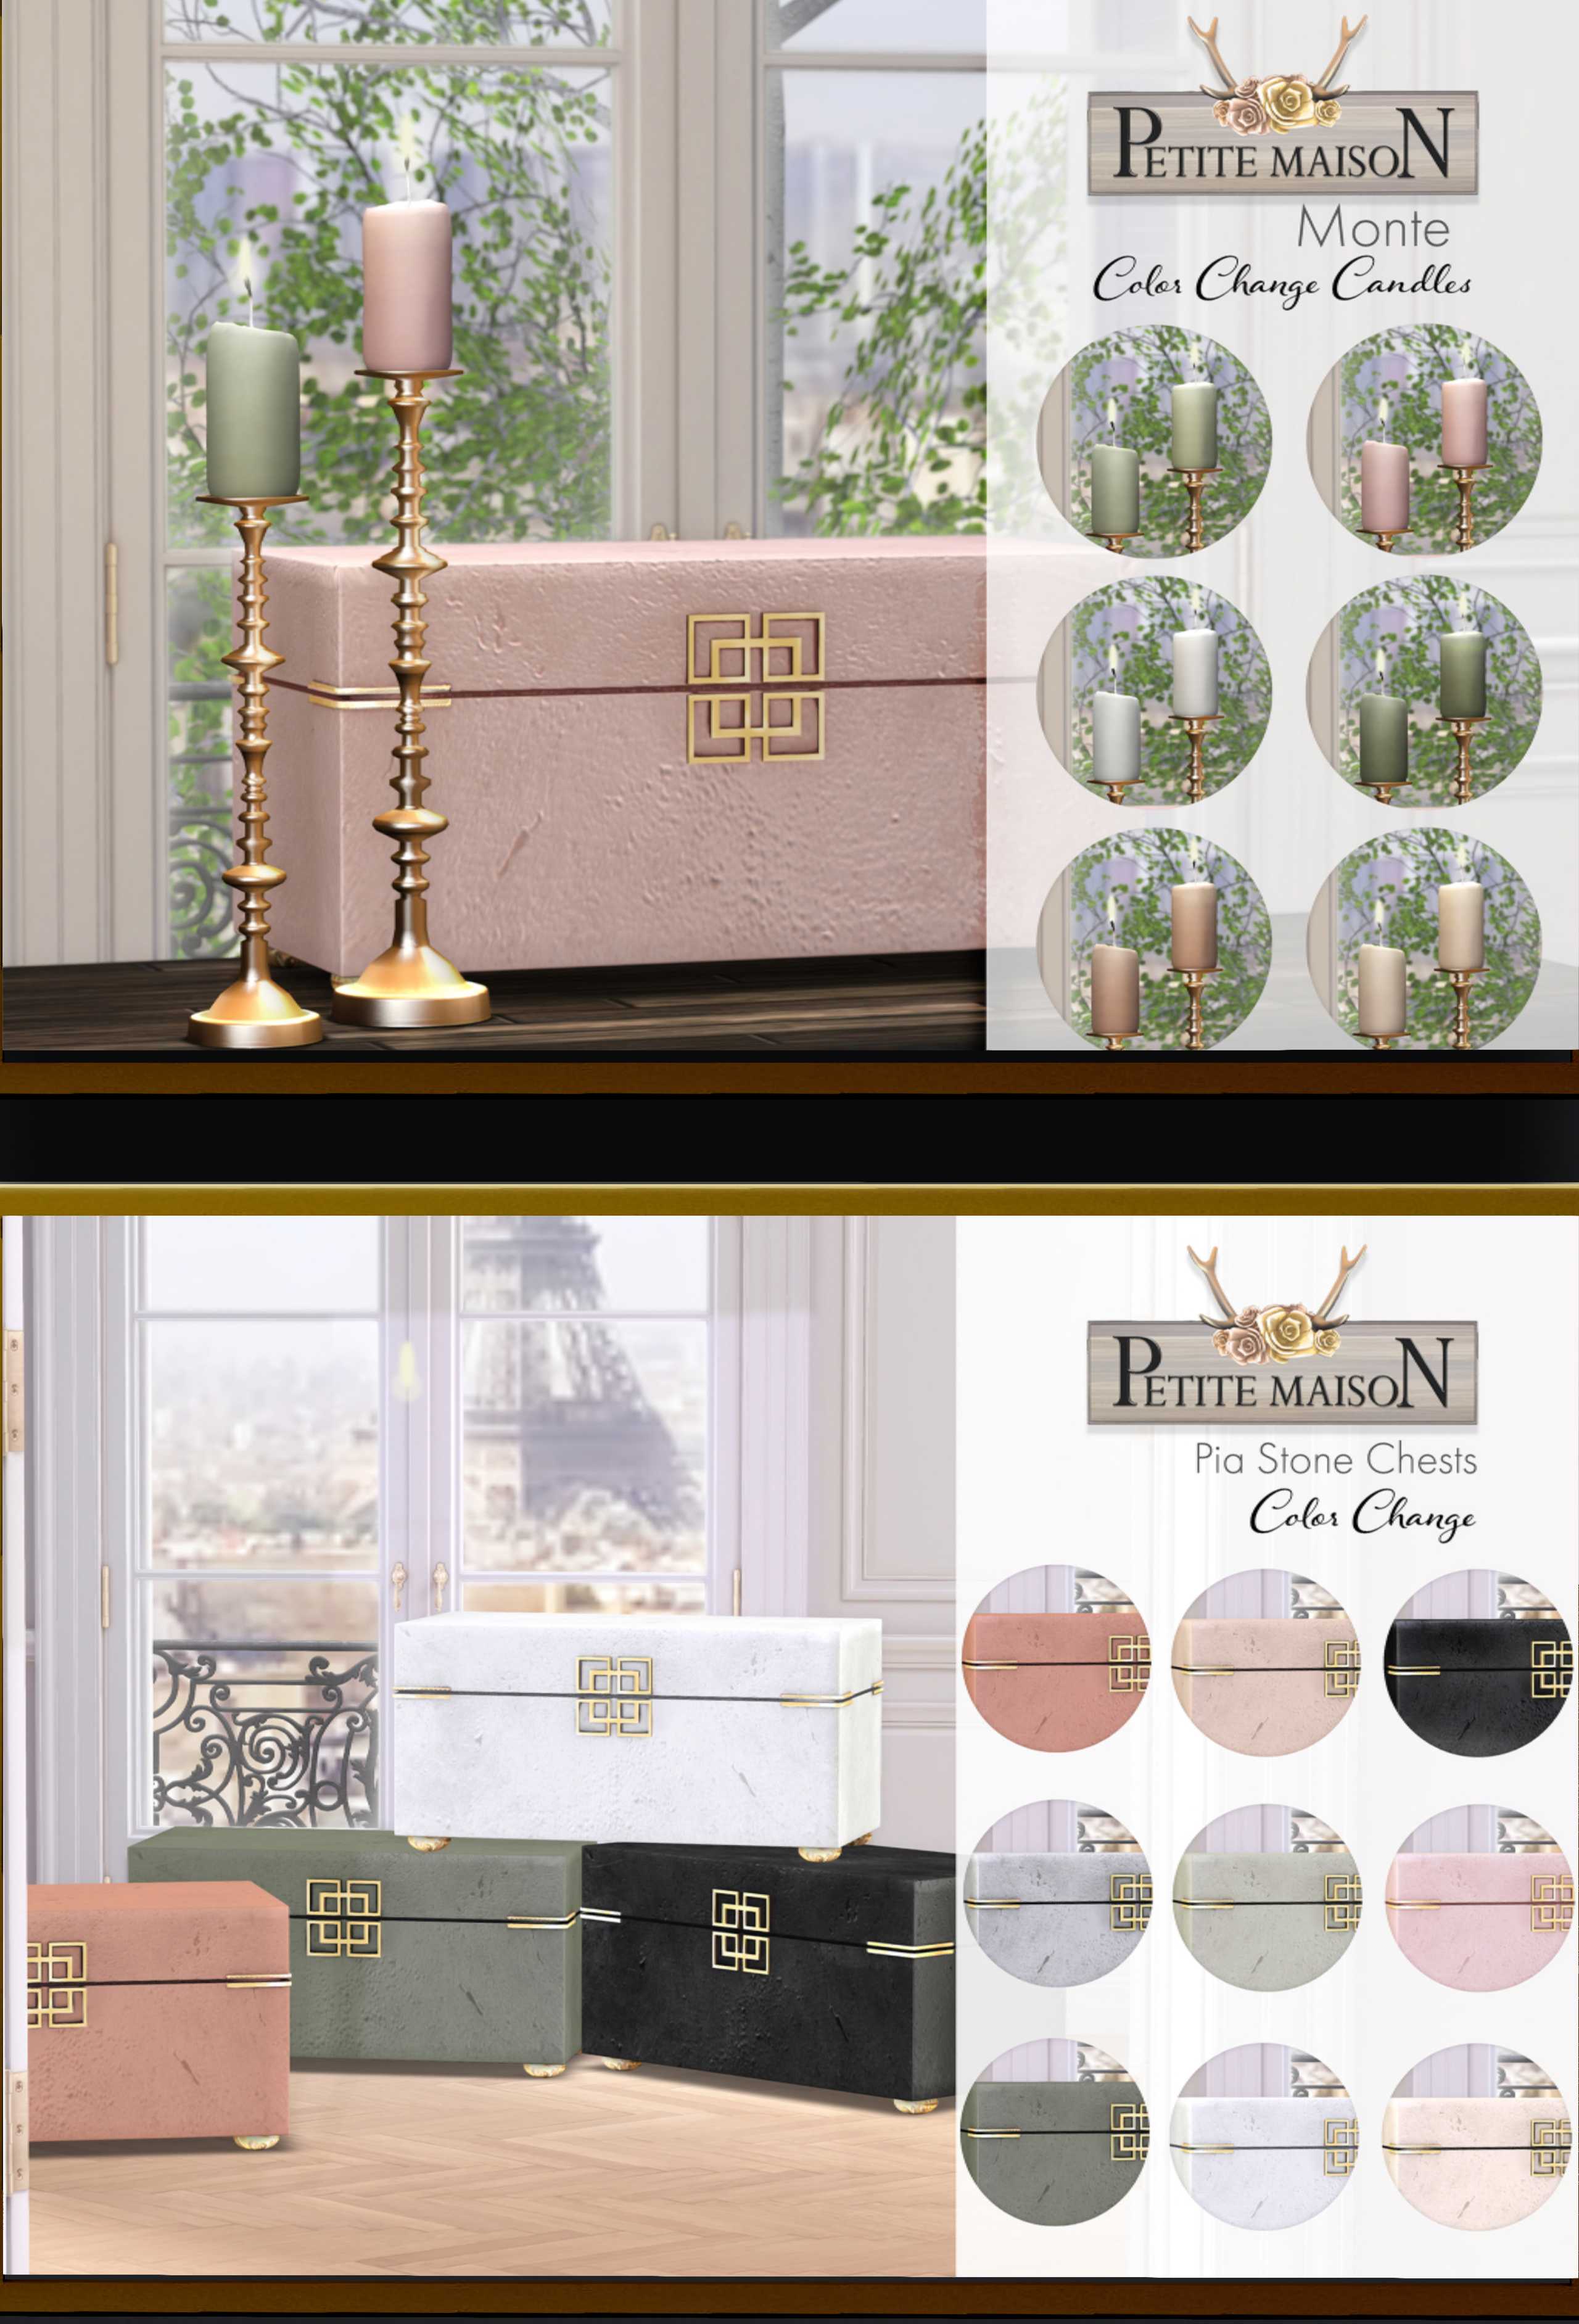 Petite Maison – Monte Candles & Pia Stone Chests